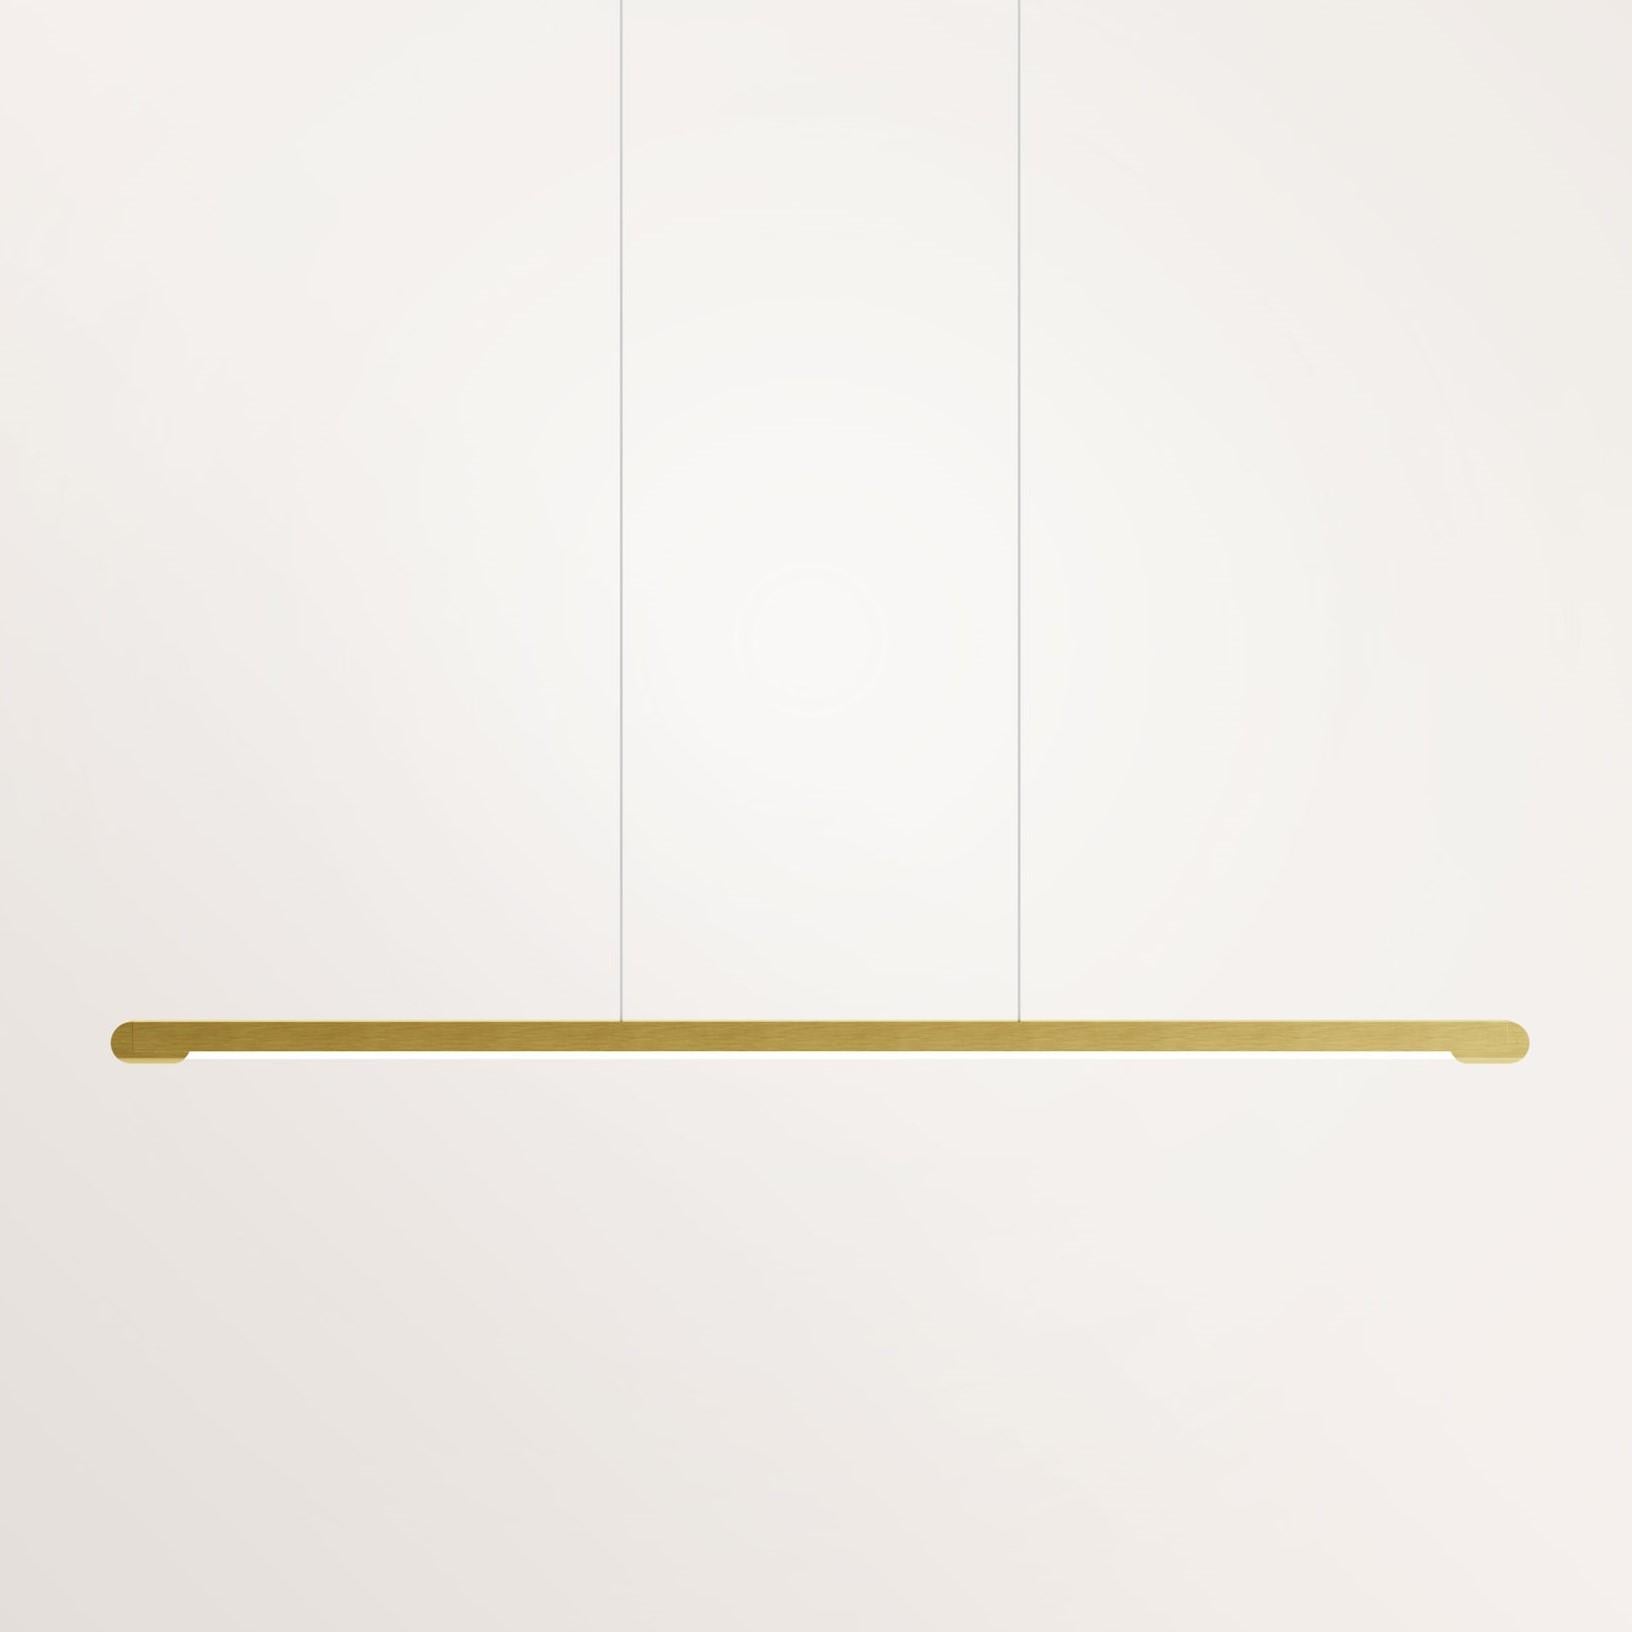 Handmade Falko chandelier by Gobo Lights
Dimensions: 106 L X 2 l X 100 H
Materials: Brass, opaline

The performance of the tightrope walker Falko Traber drew the eyes of the crowds, on the line he mastered.

Self-taught and from the world of